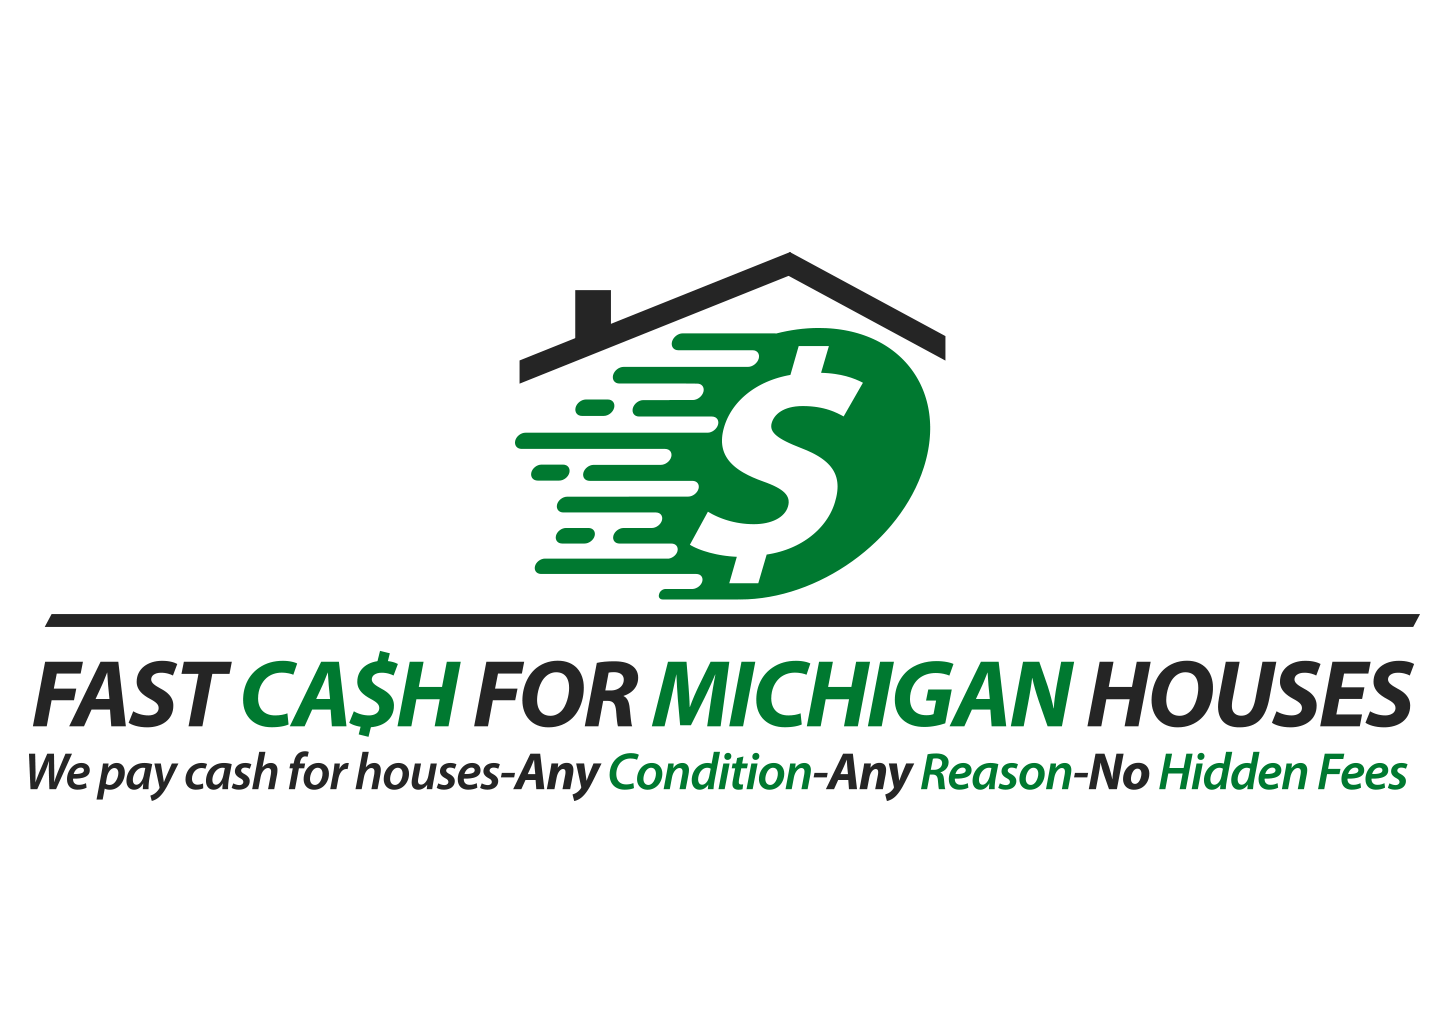 Fast Cash Logo - Get A Cash Offer Today. Fast Cash for Michigan Houses